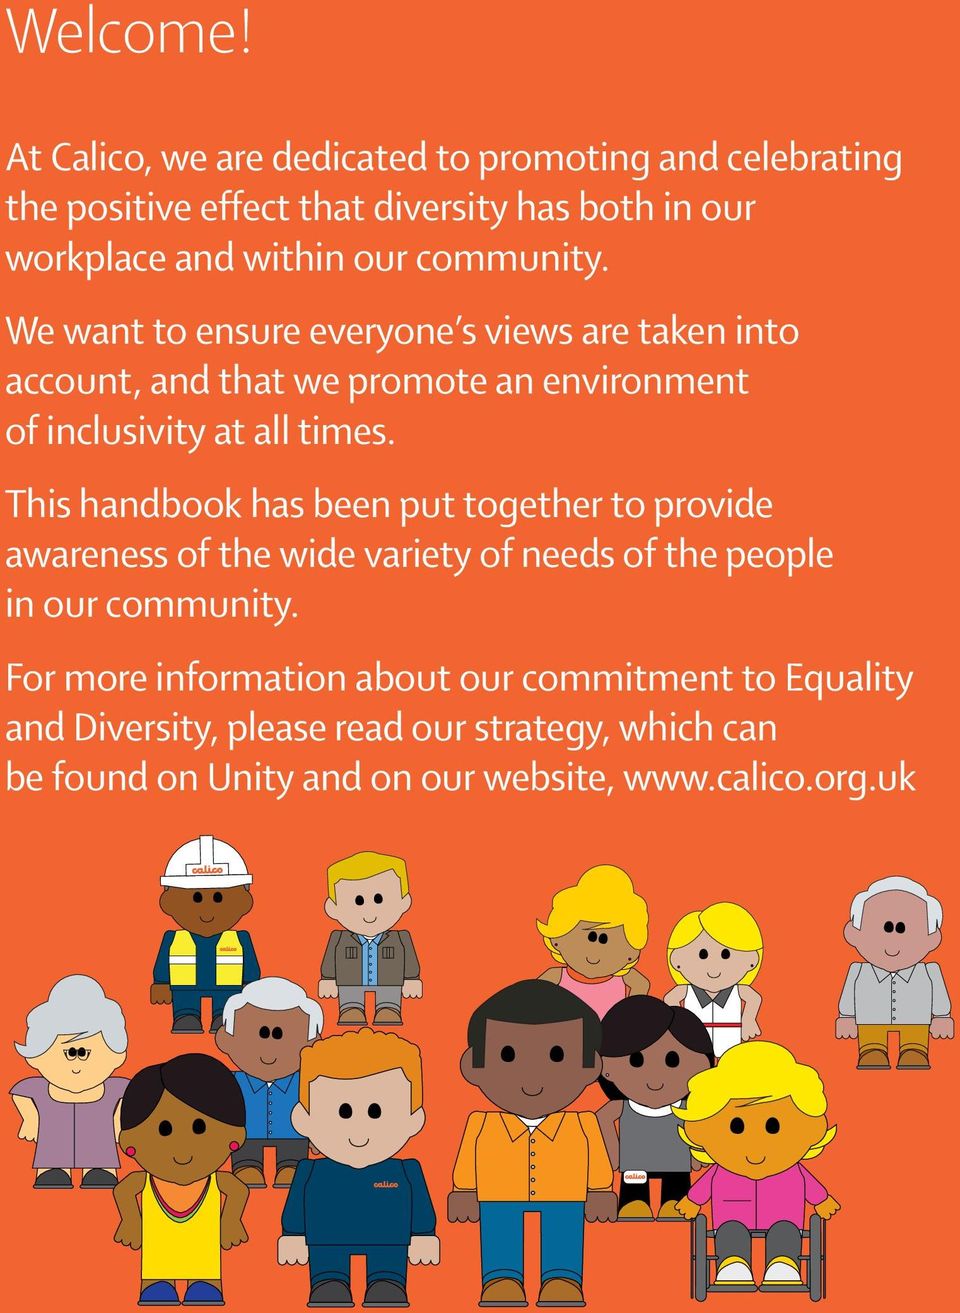 We want to ensure everyone s views are taken into account, and that we promote an environment of inclusivity at all times.